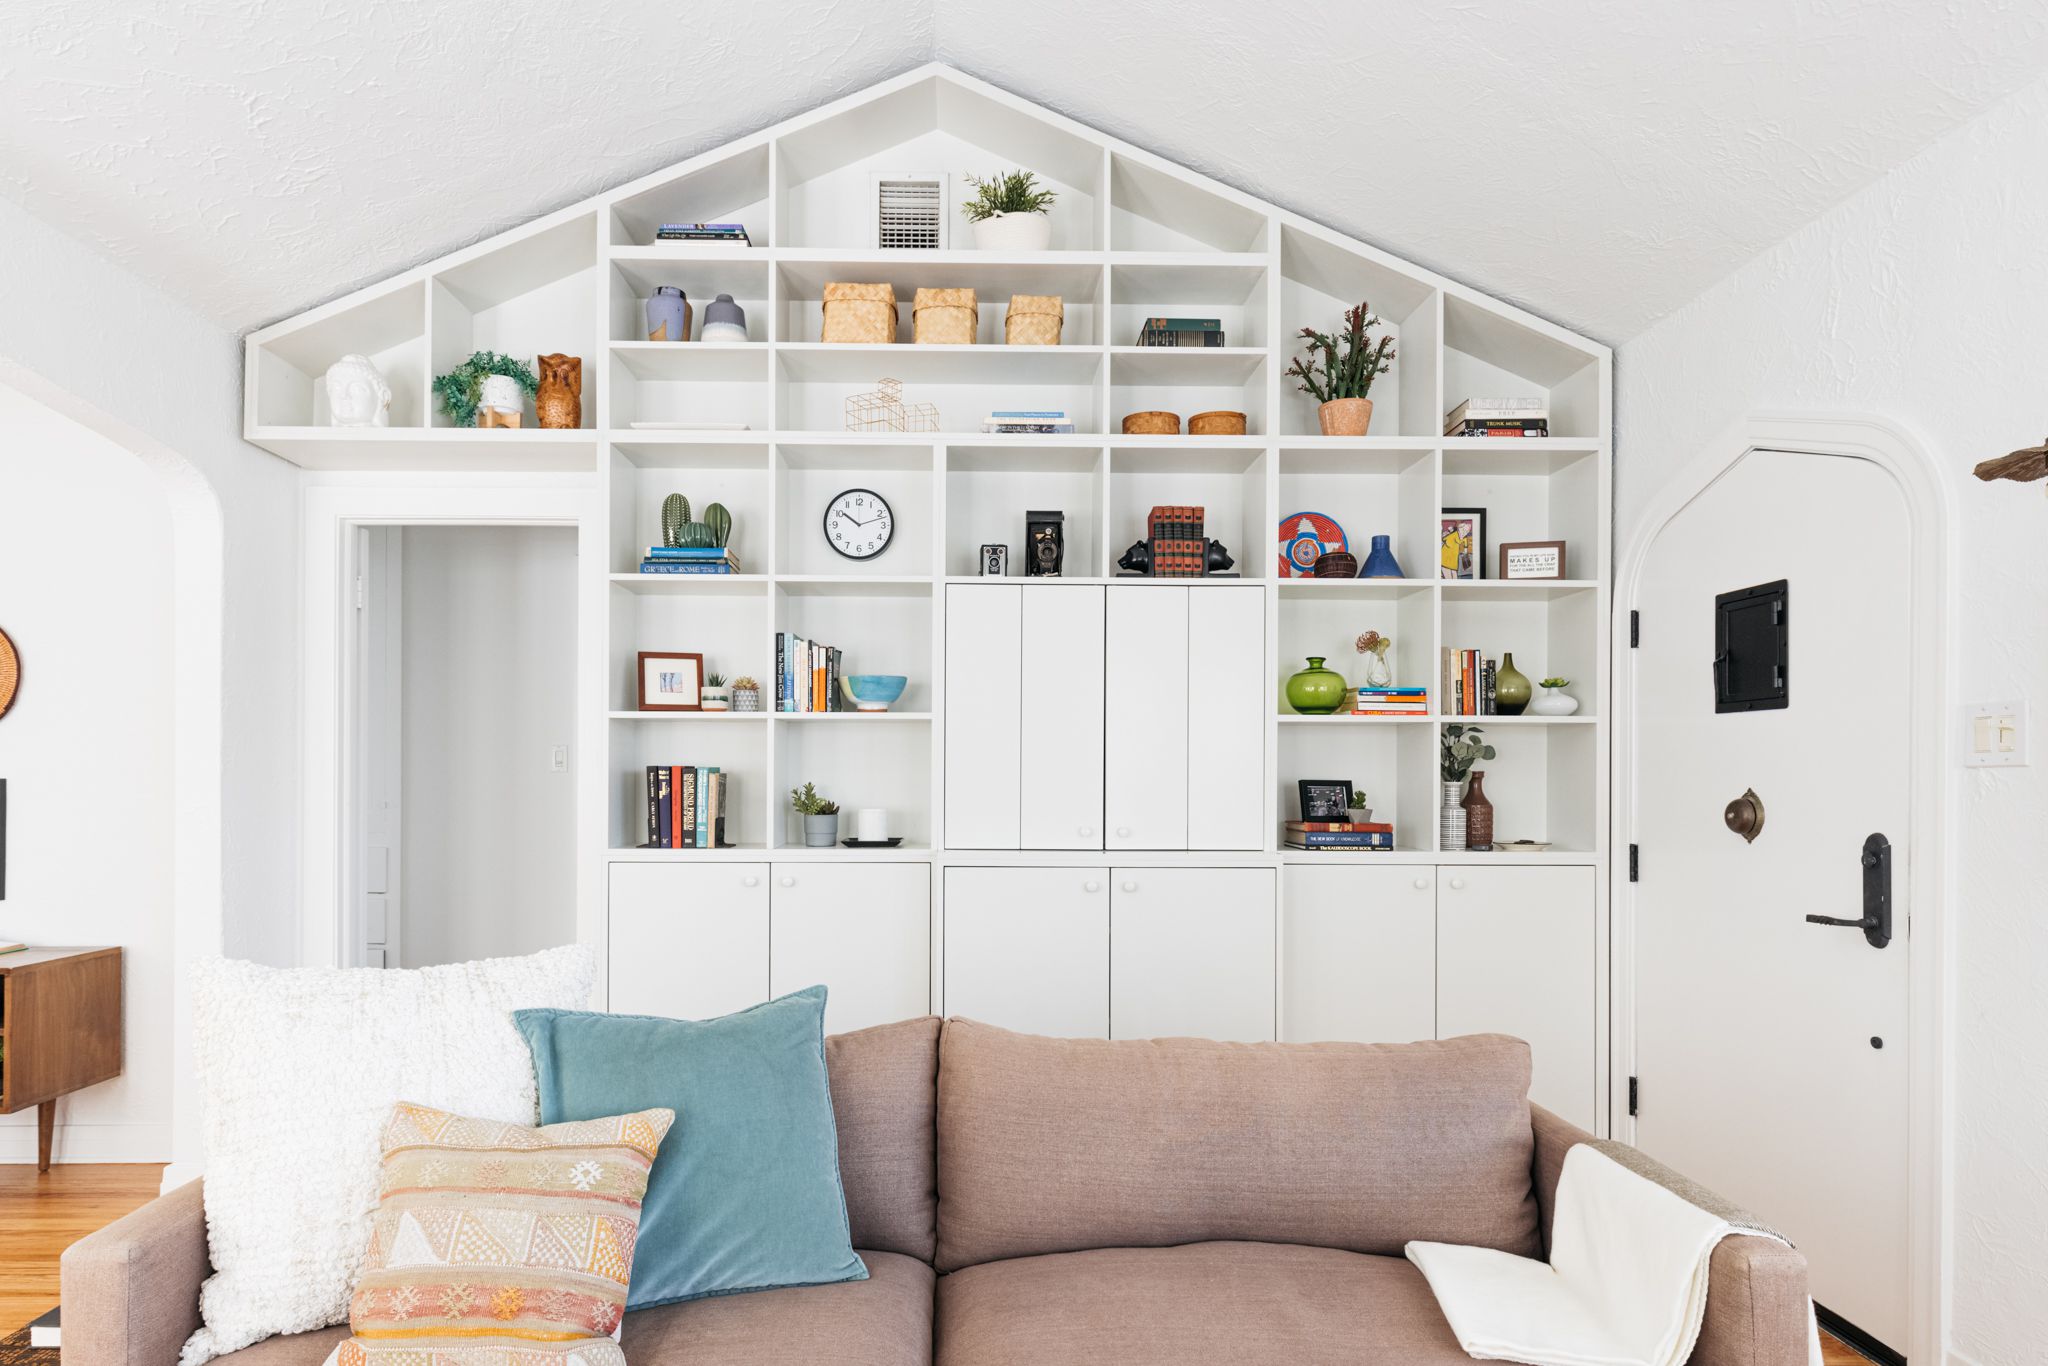 17 DIY Built-in Bookcases We Want to Copy